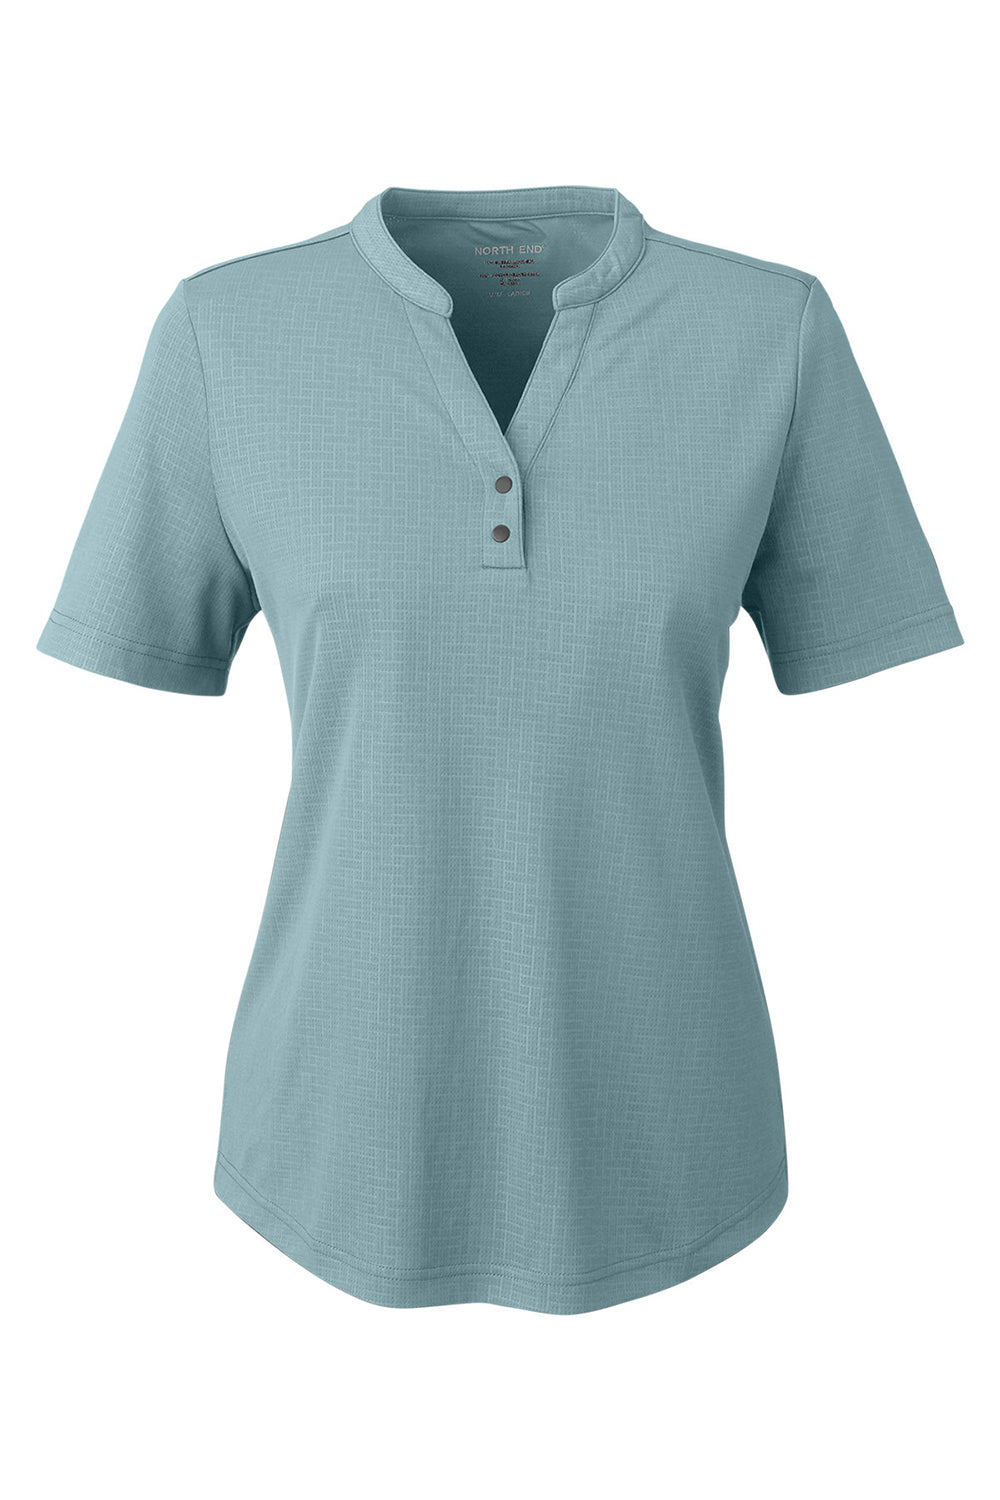 North End NE102W Womens Replay Recycled Short Sleeve Polo Shirt Opal Blue Flat Front